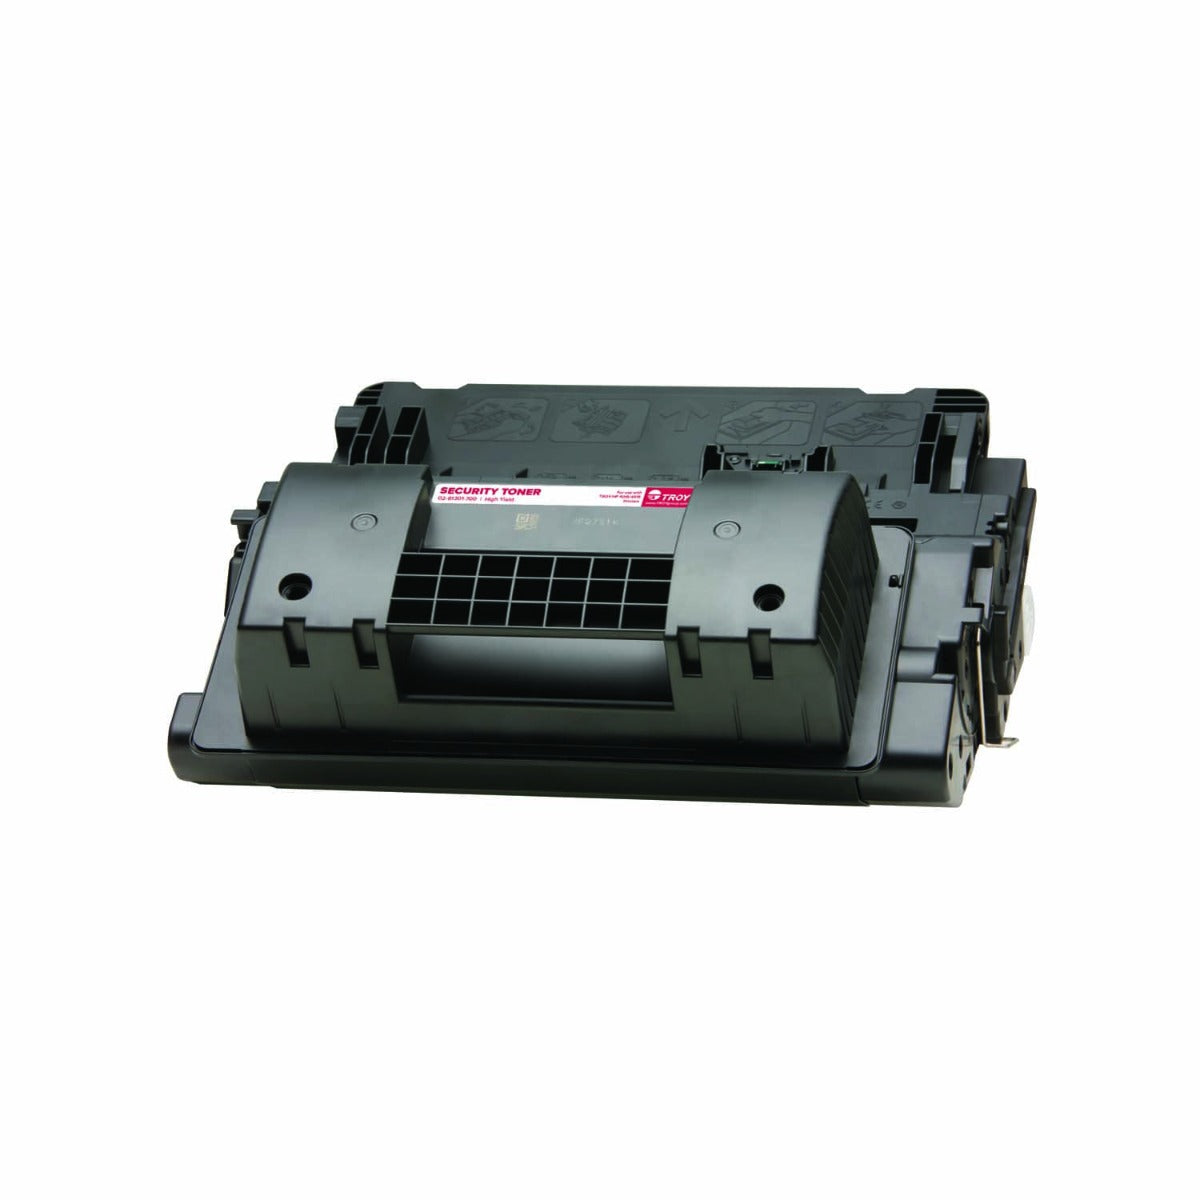 TROY M4015/4515 Security Toner High Yield